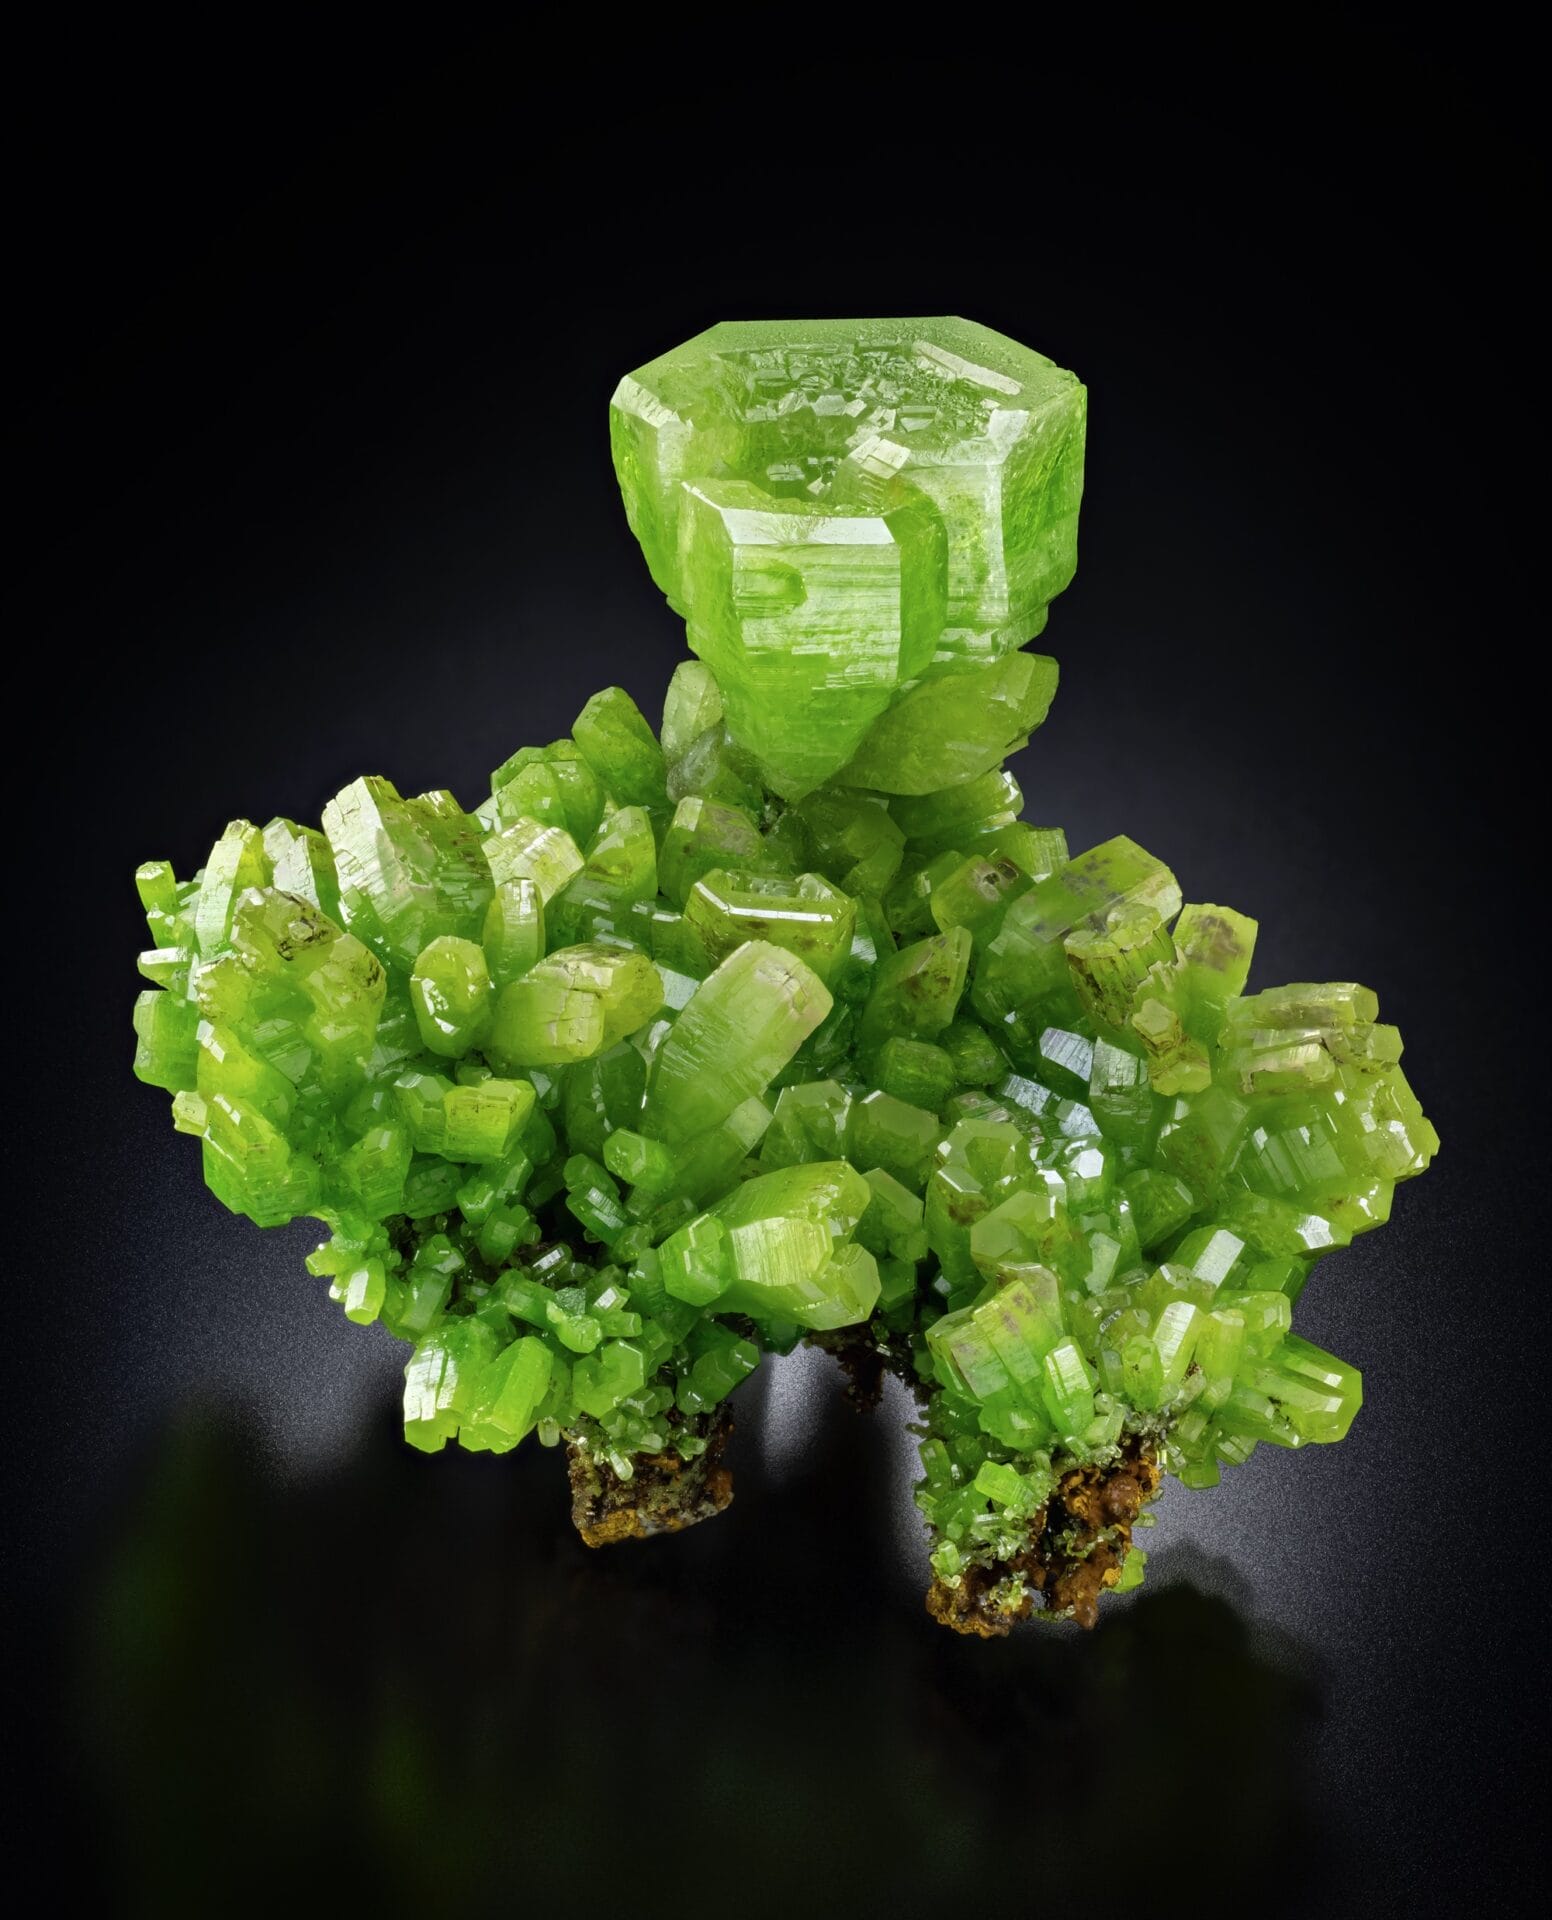 A lime-green mineral with lots of small crystalline nodes.